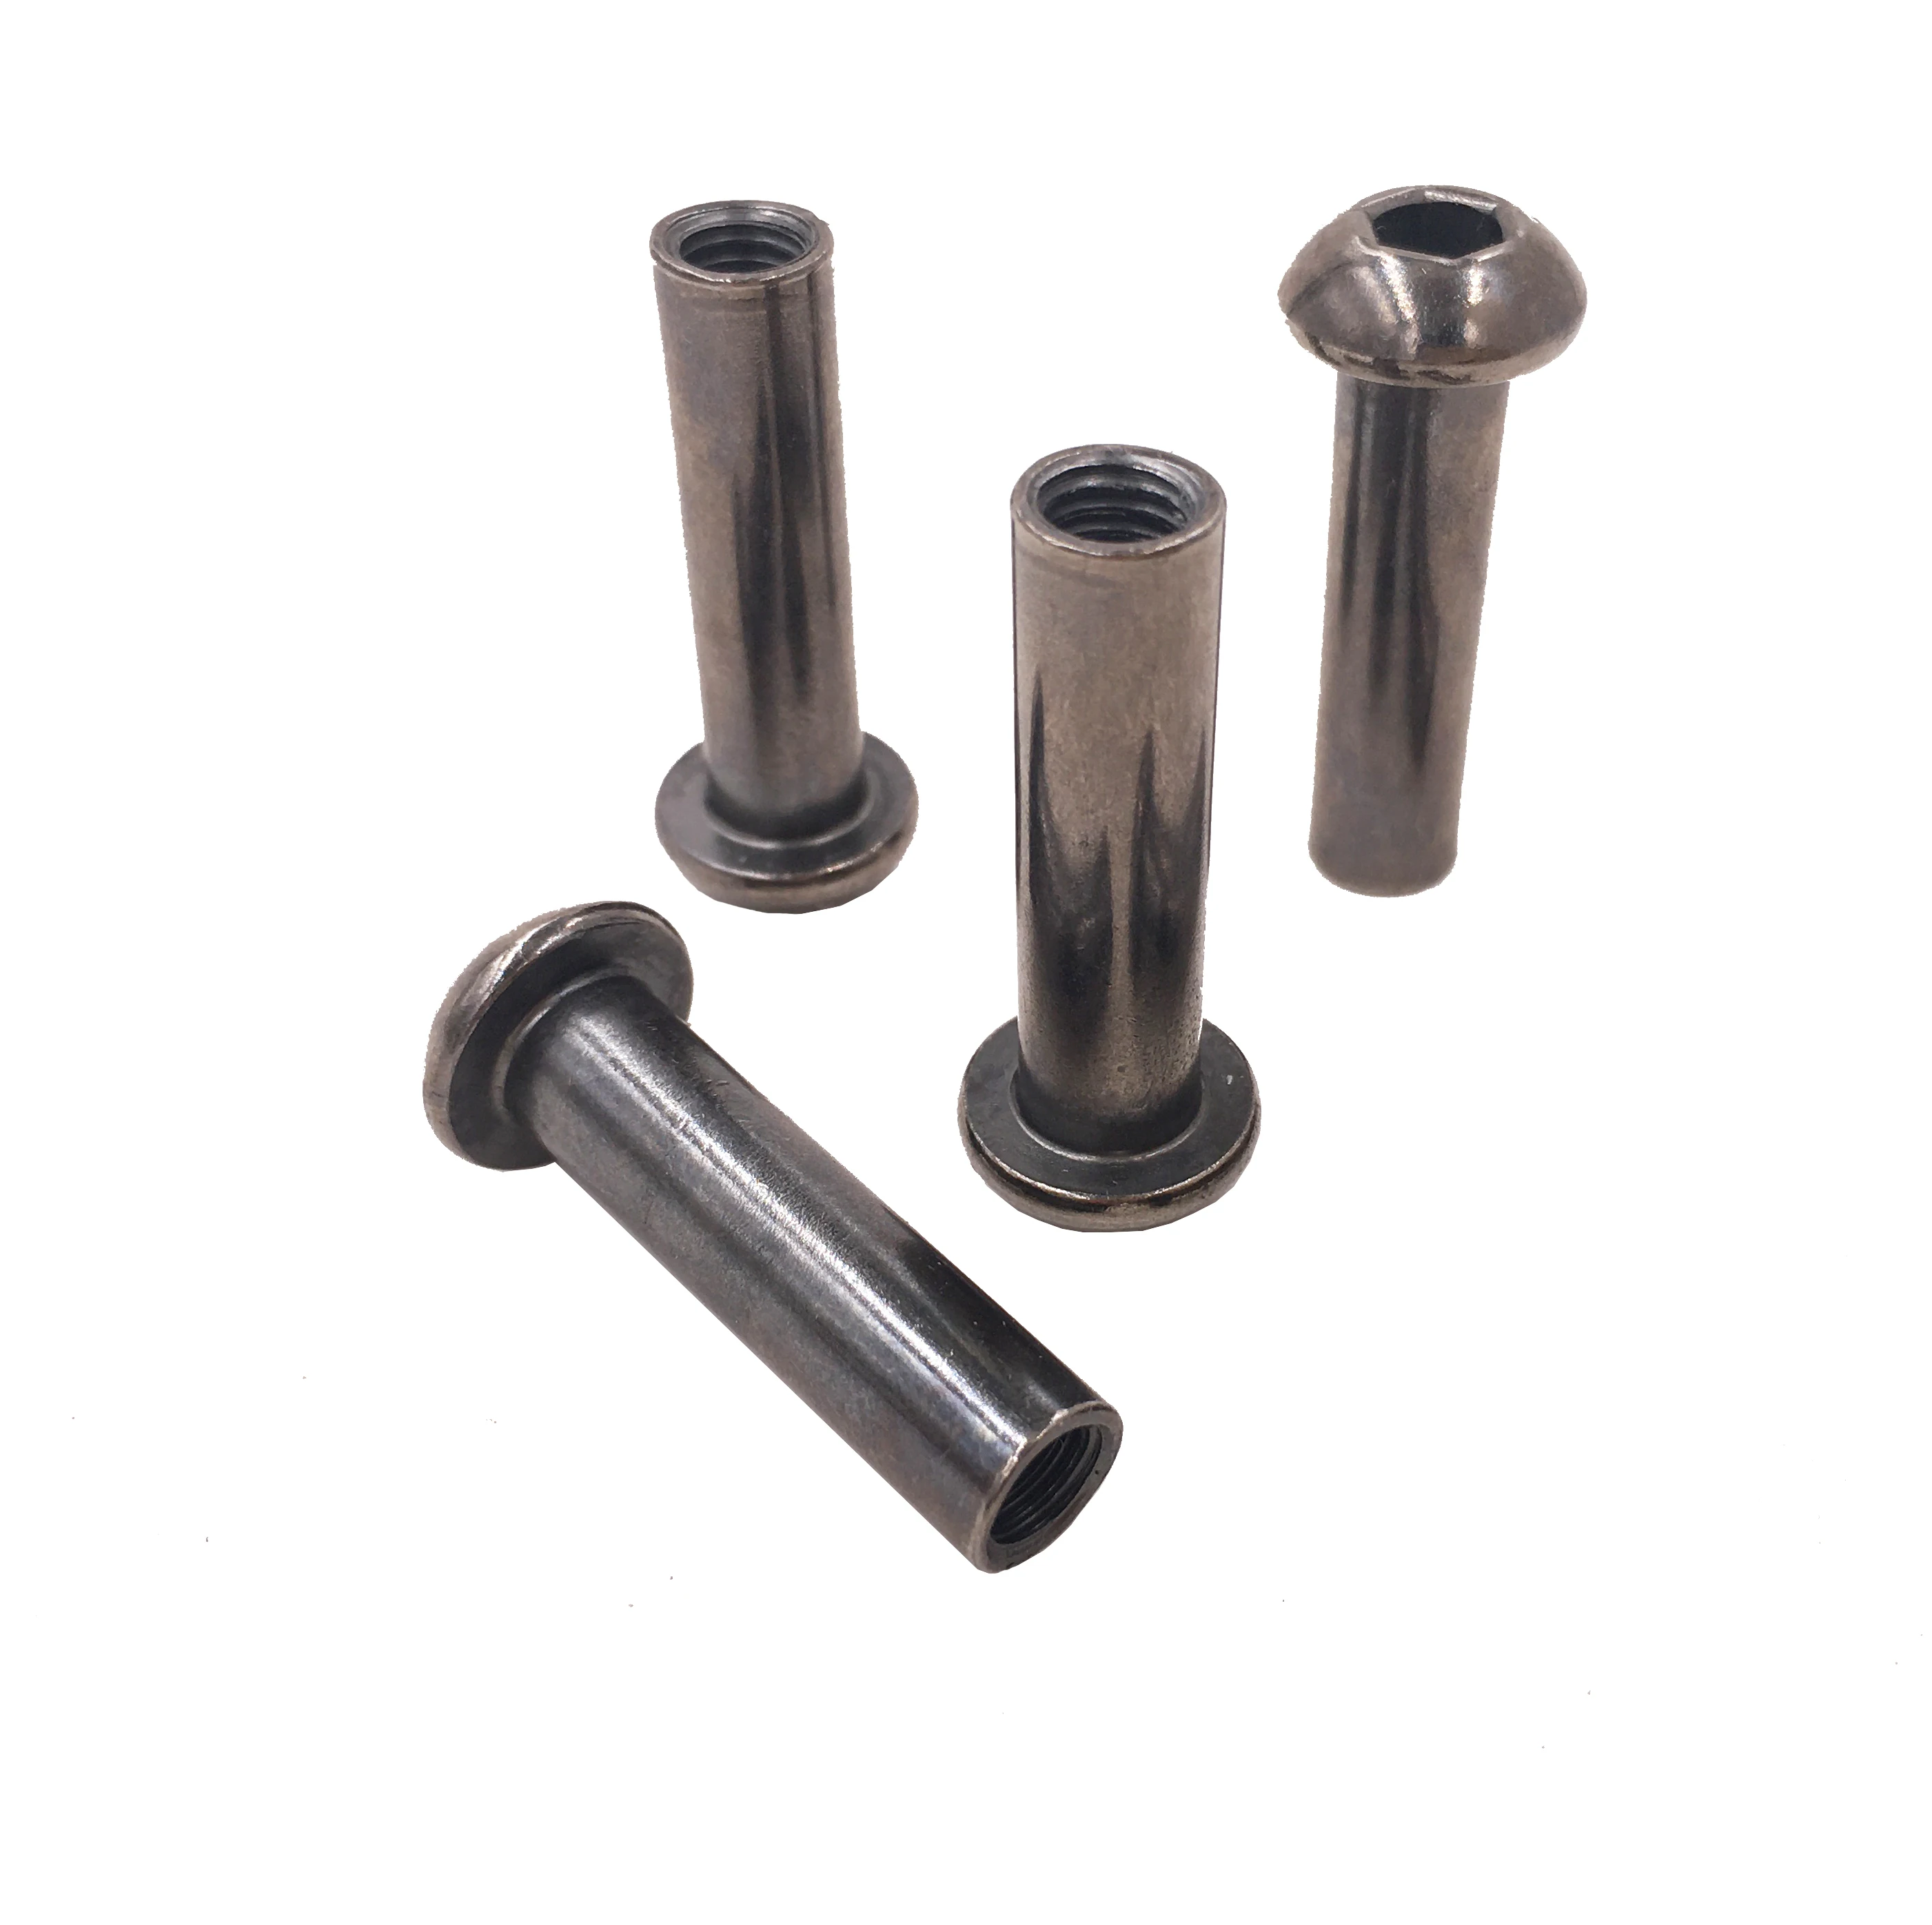 Sleeve Nuts M10 x 18 MM Zinc Plated Pack Of 4 A18 